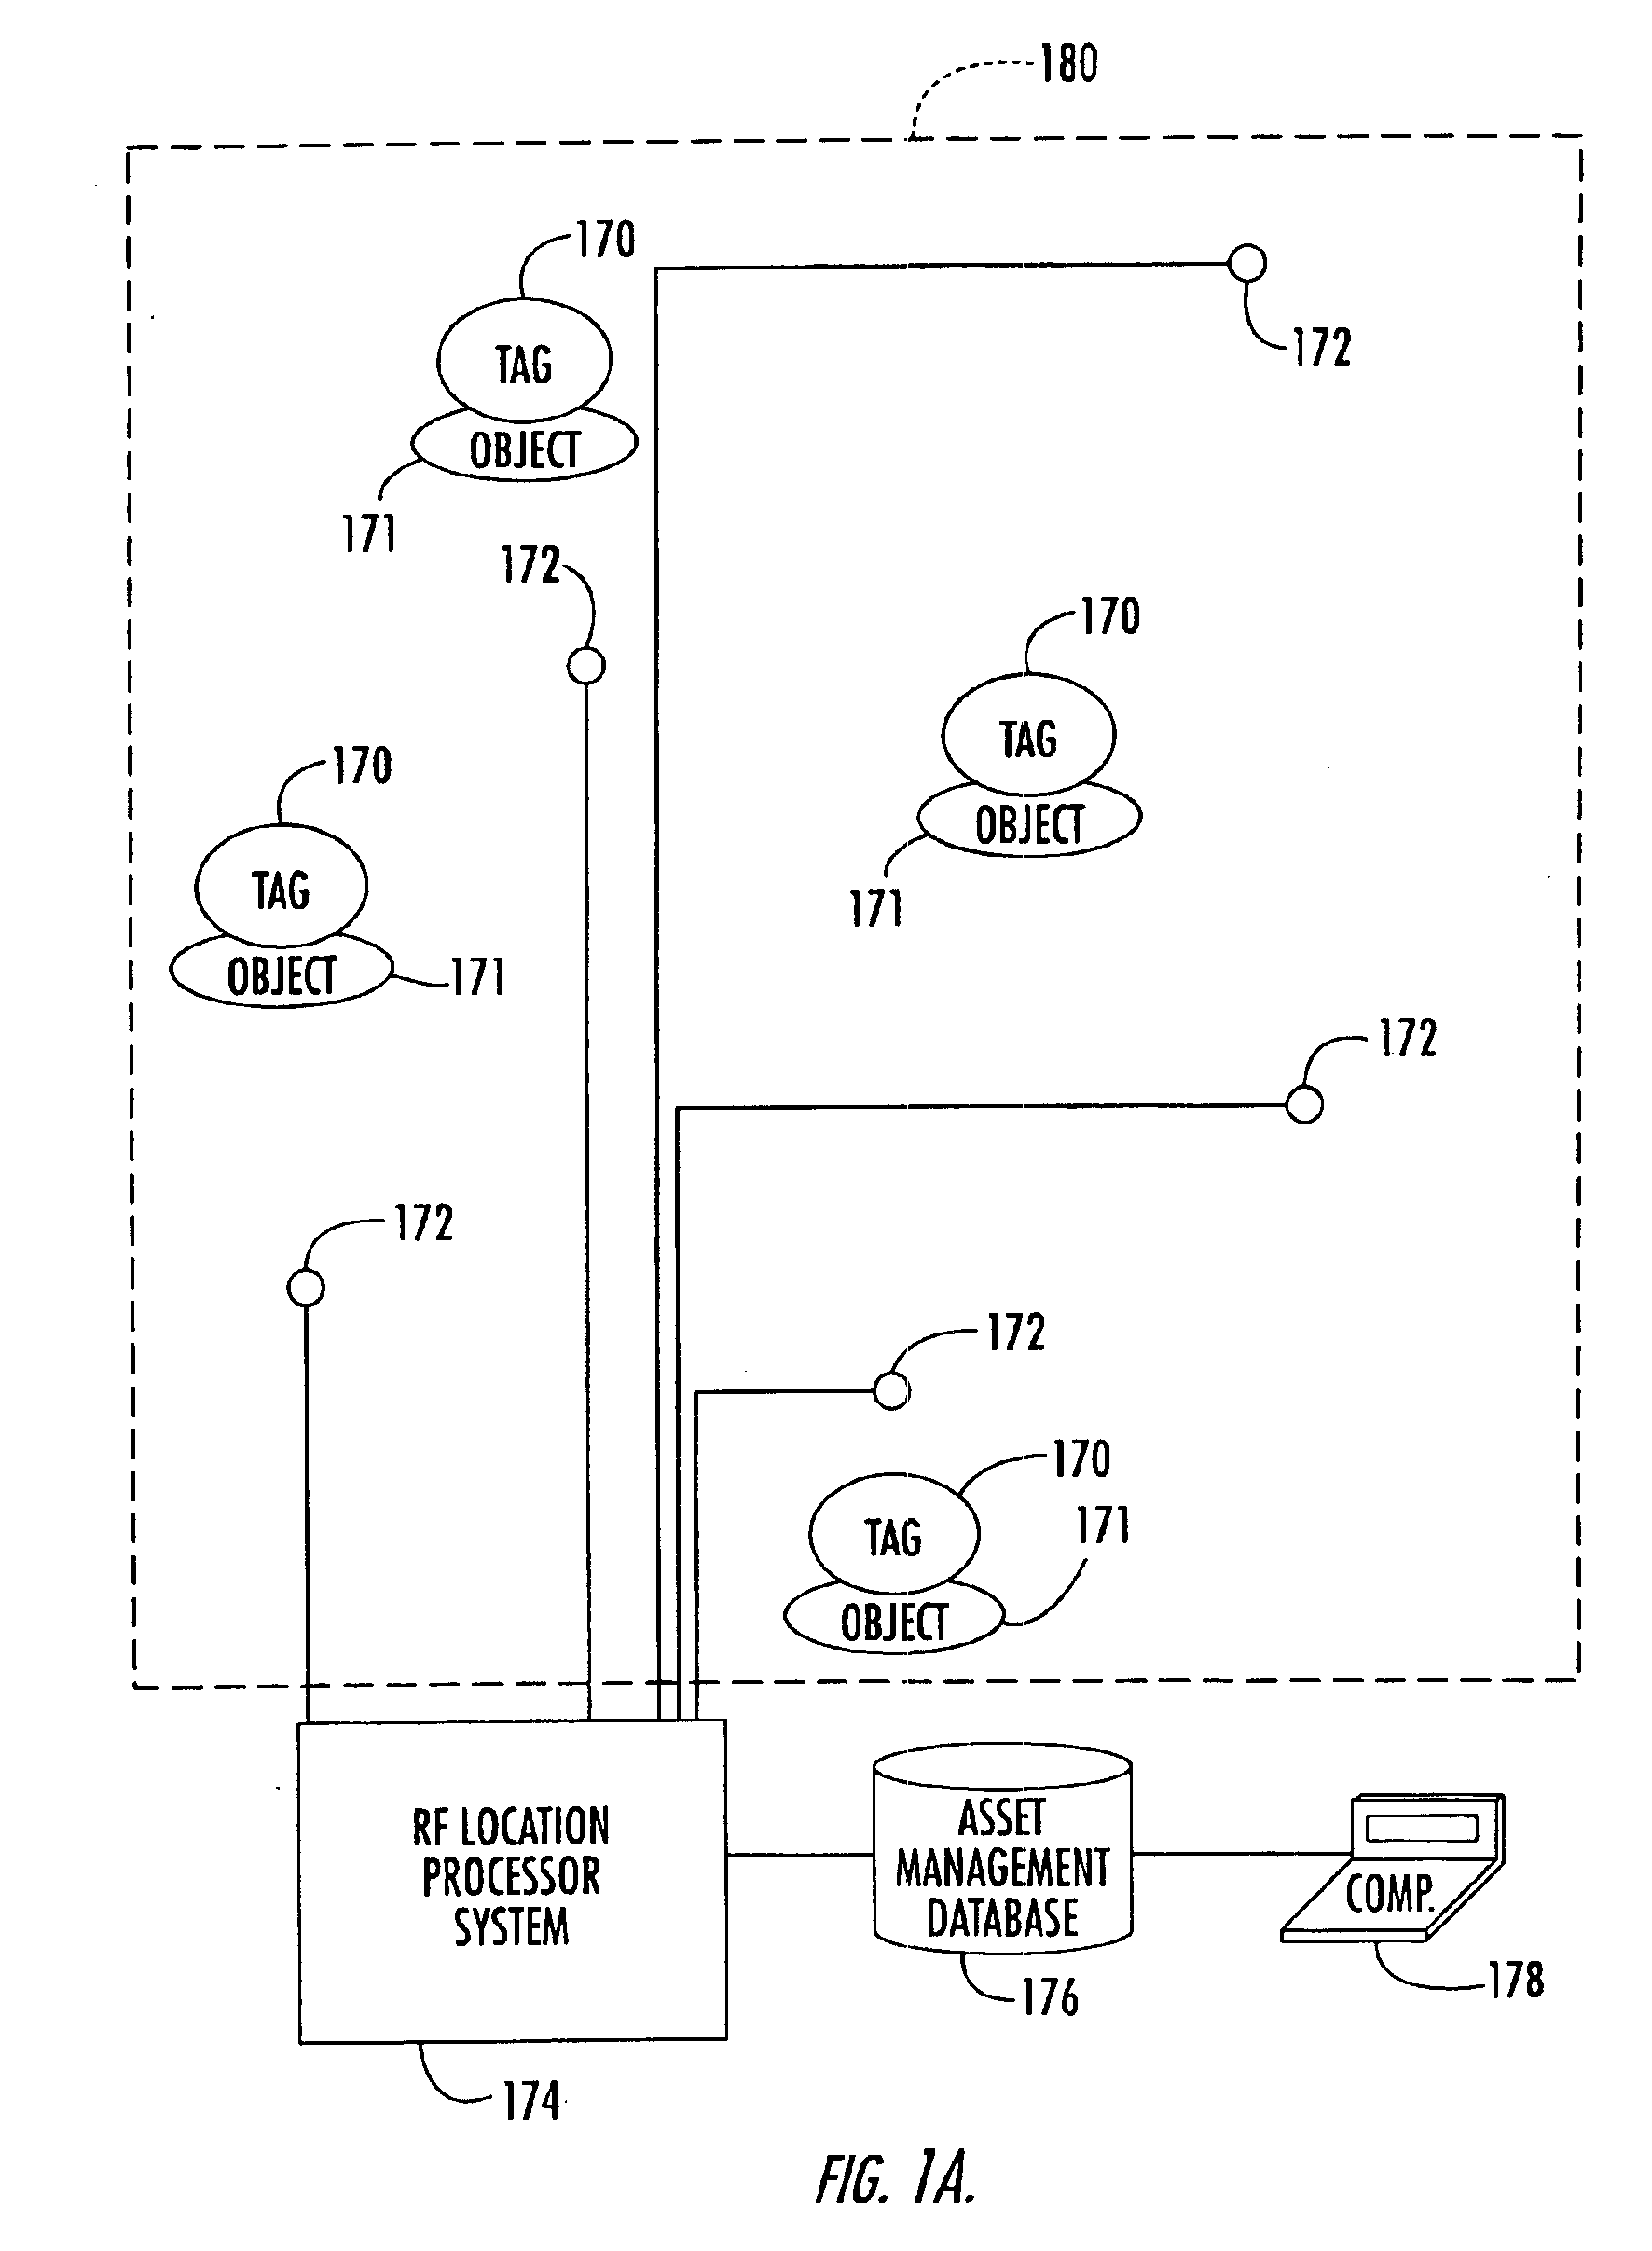 Interference suppression for wireless local area network and location system